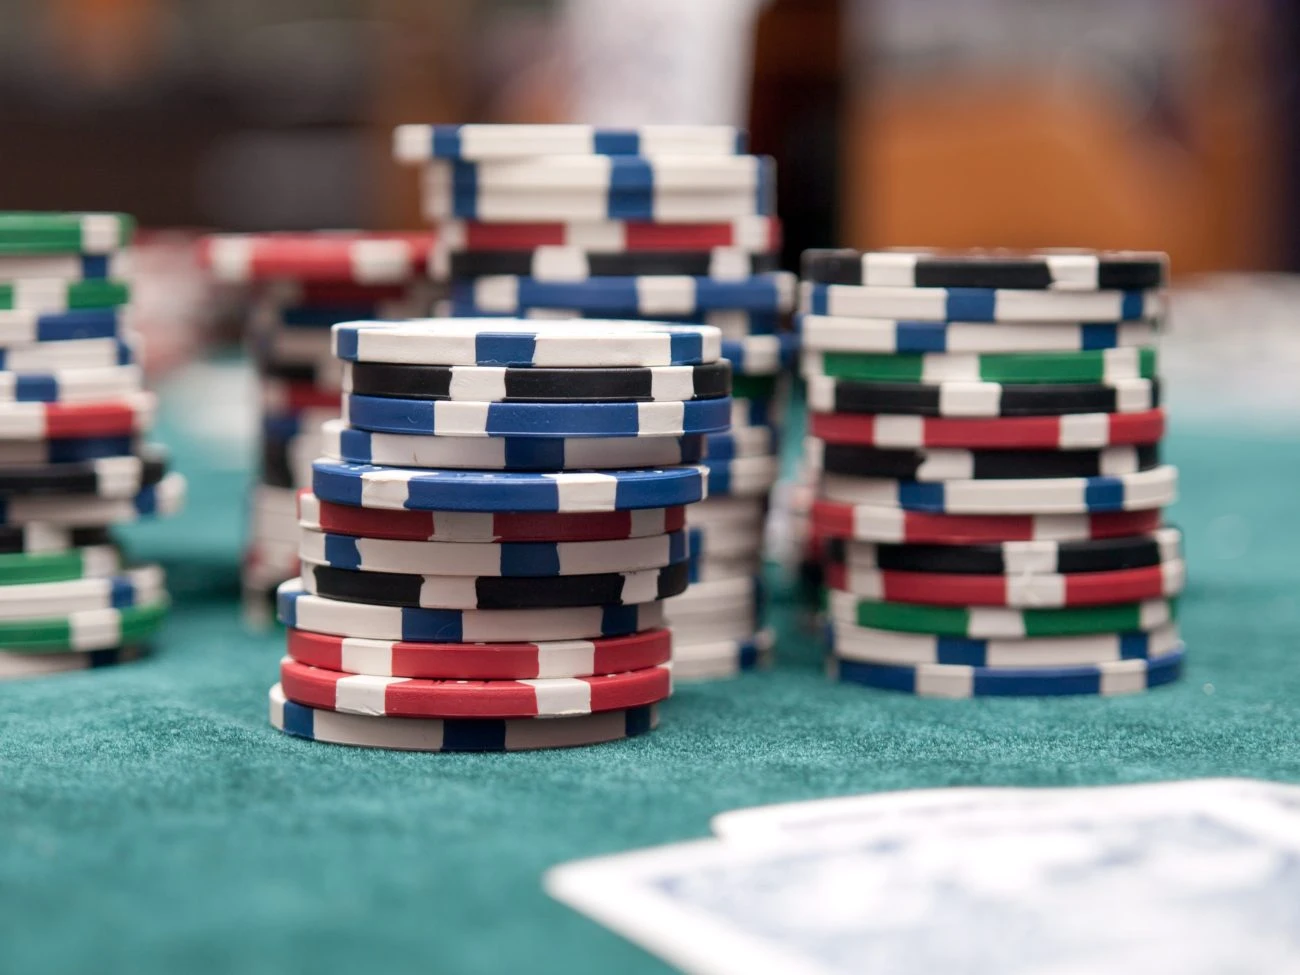 NIESR to conduct gambling harm research project